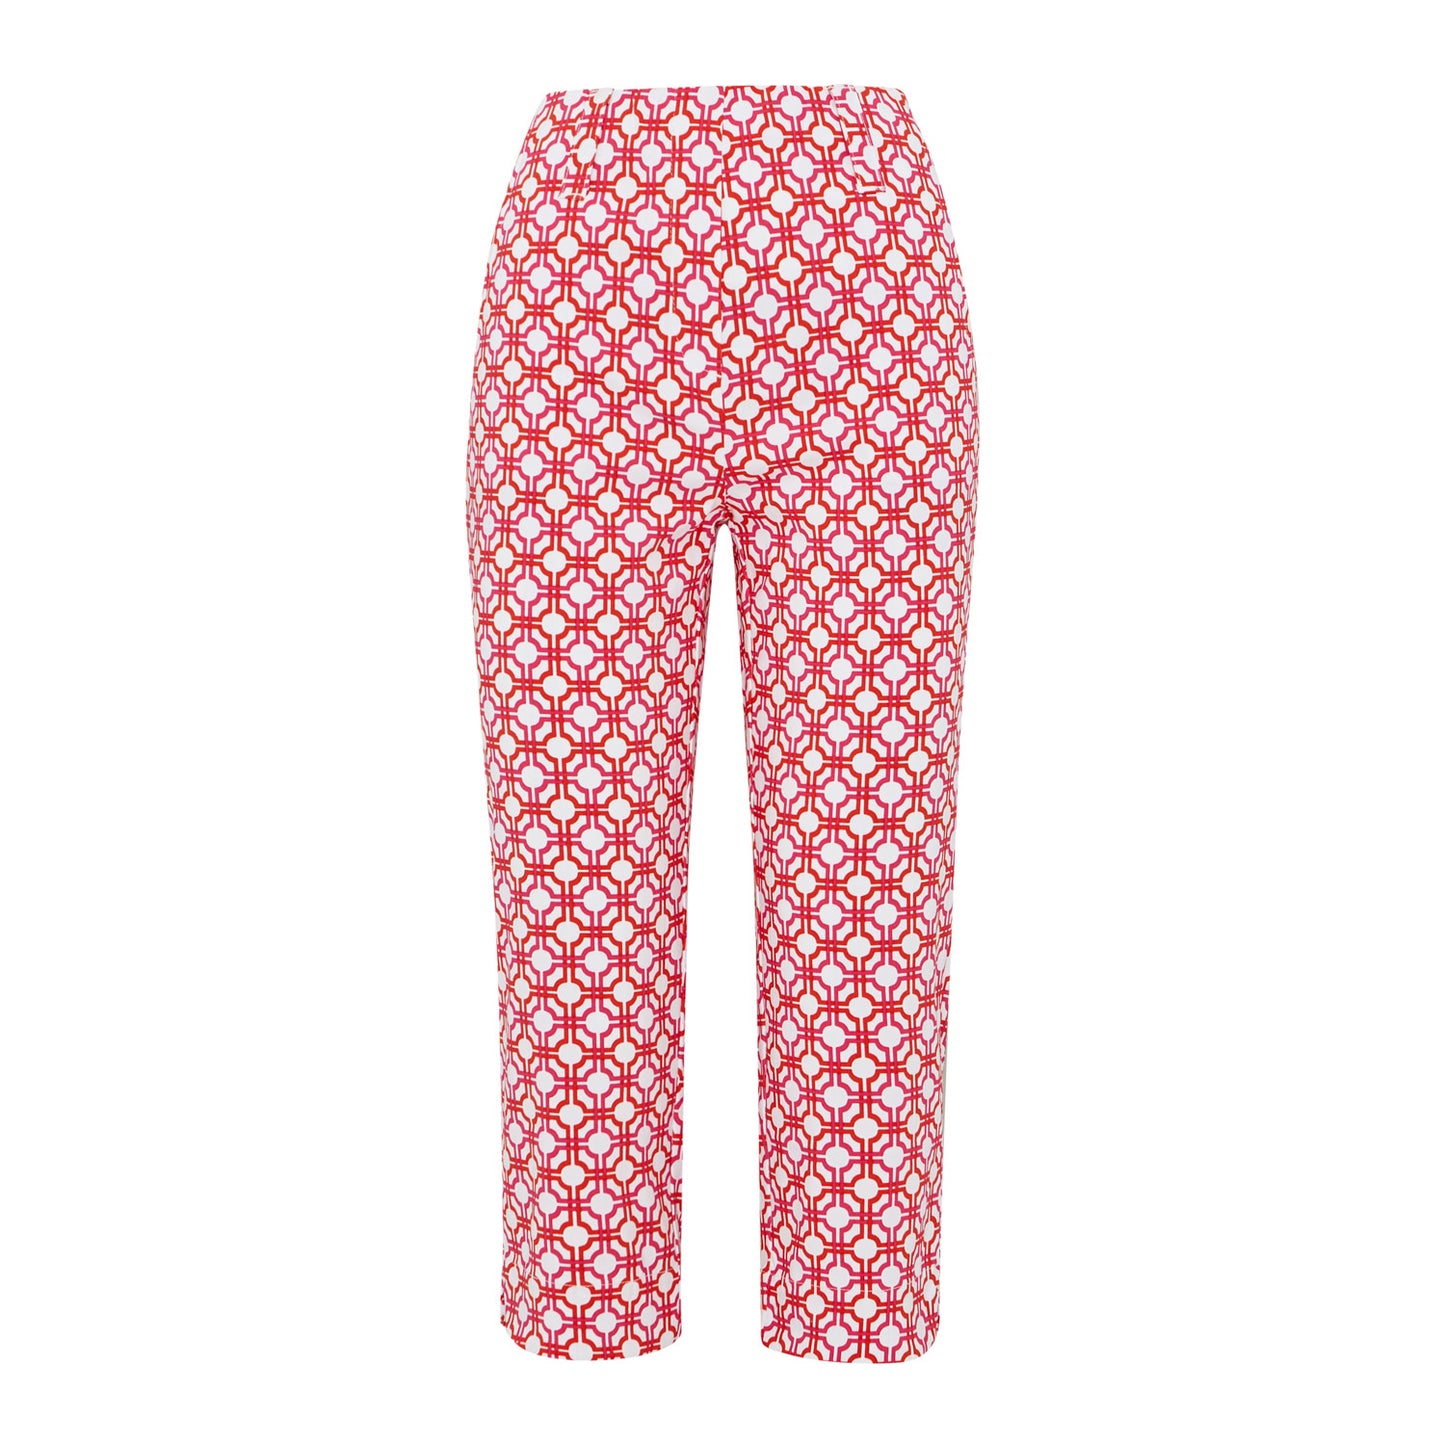 Swing Out Sister Ladies Pull-On Capris in Lush Pink and Mandarin with ...